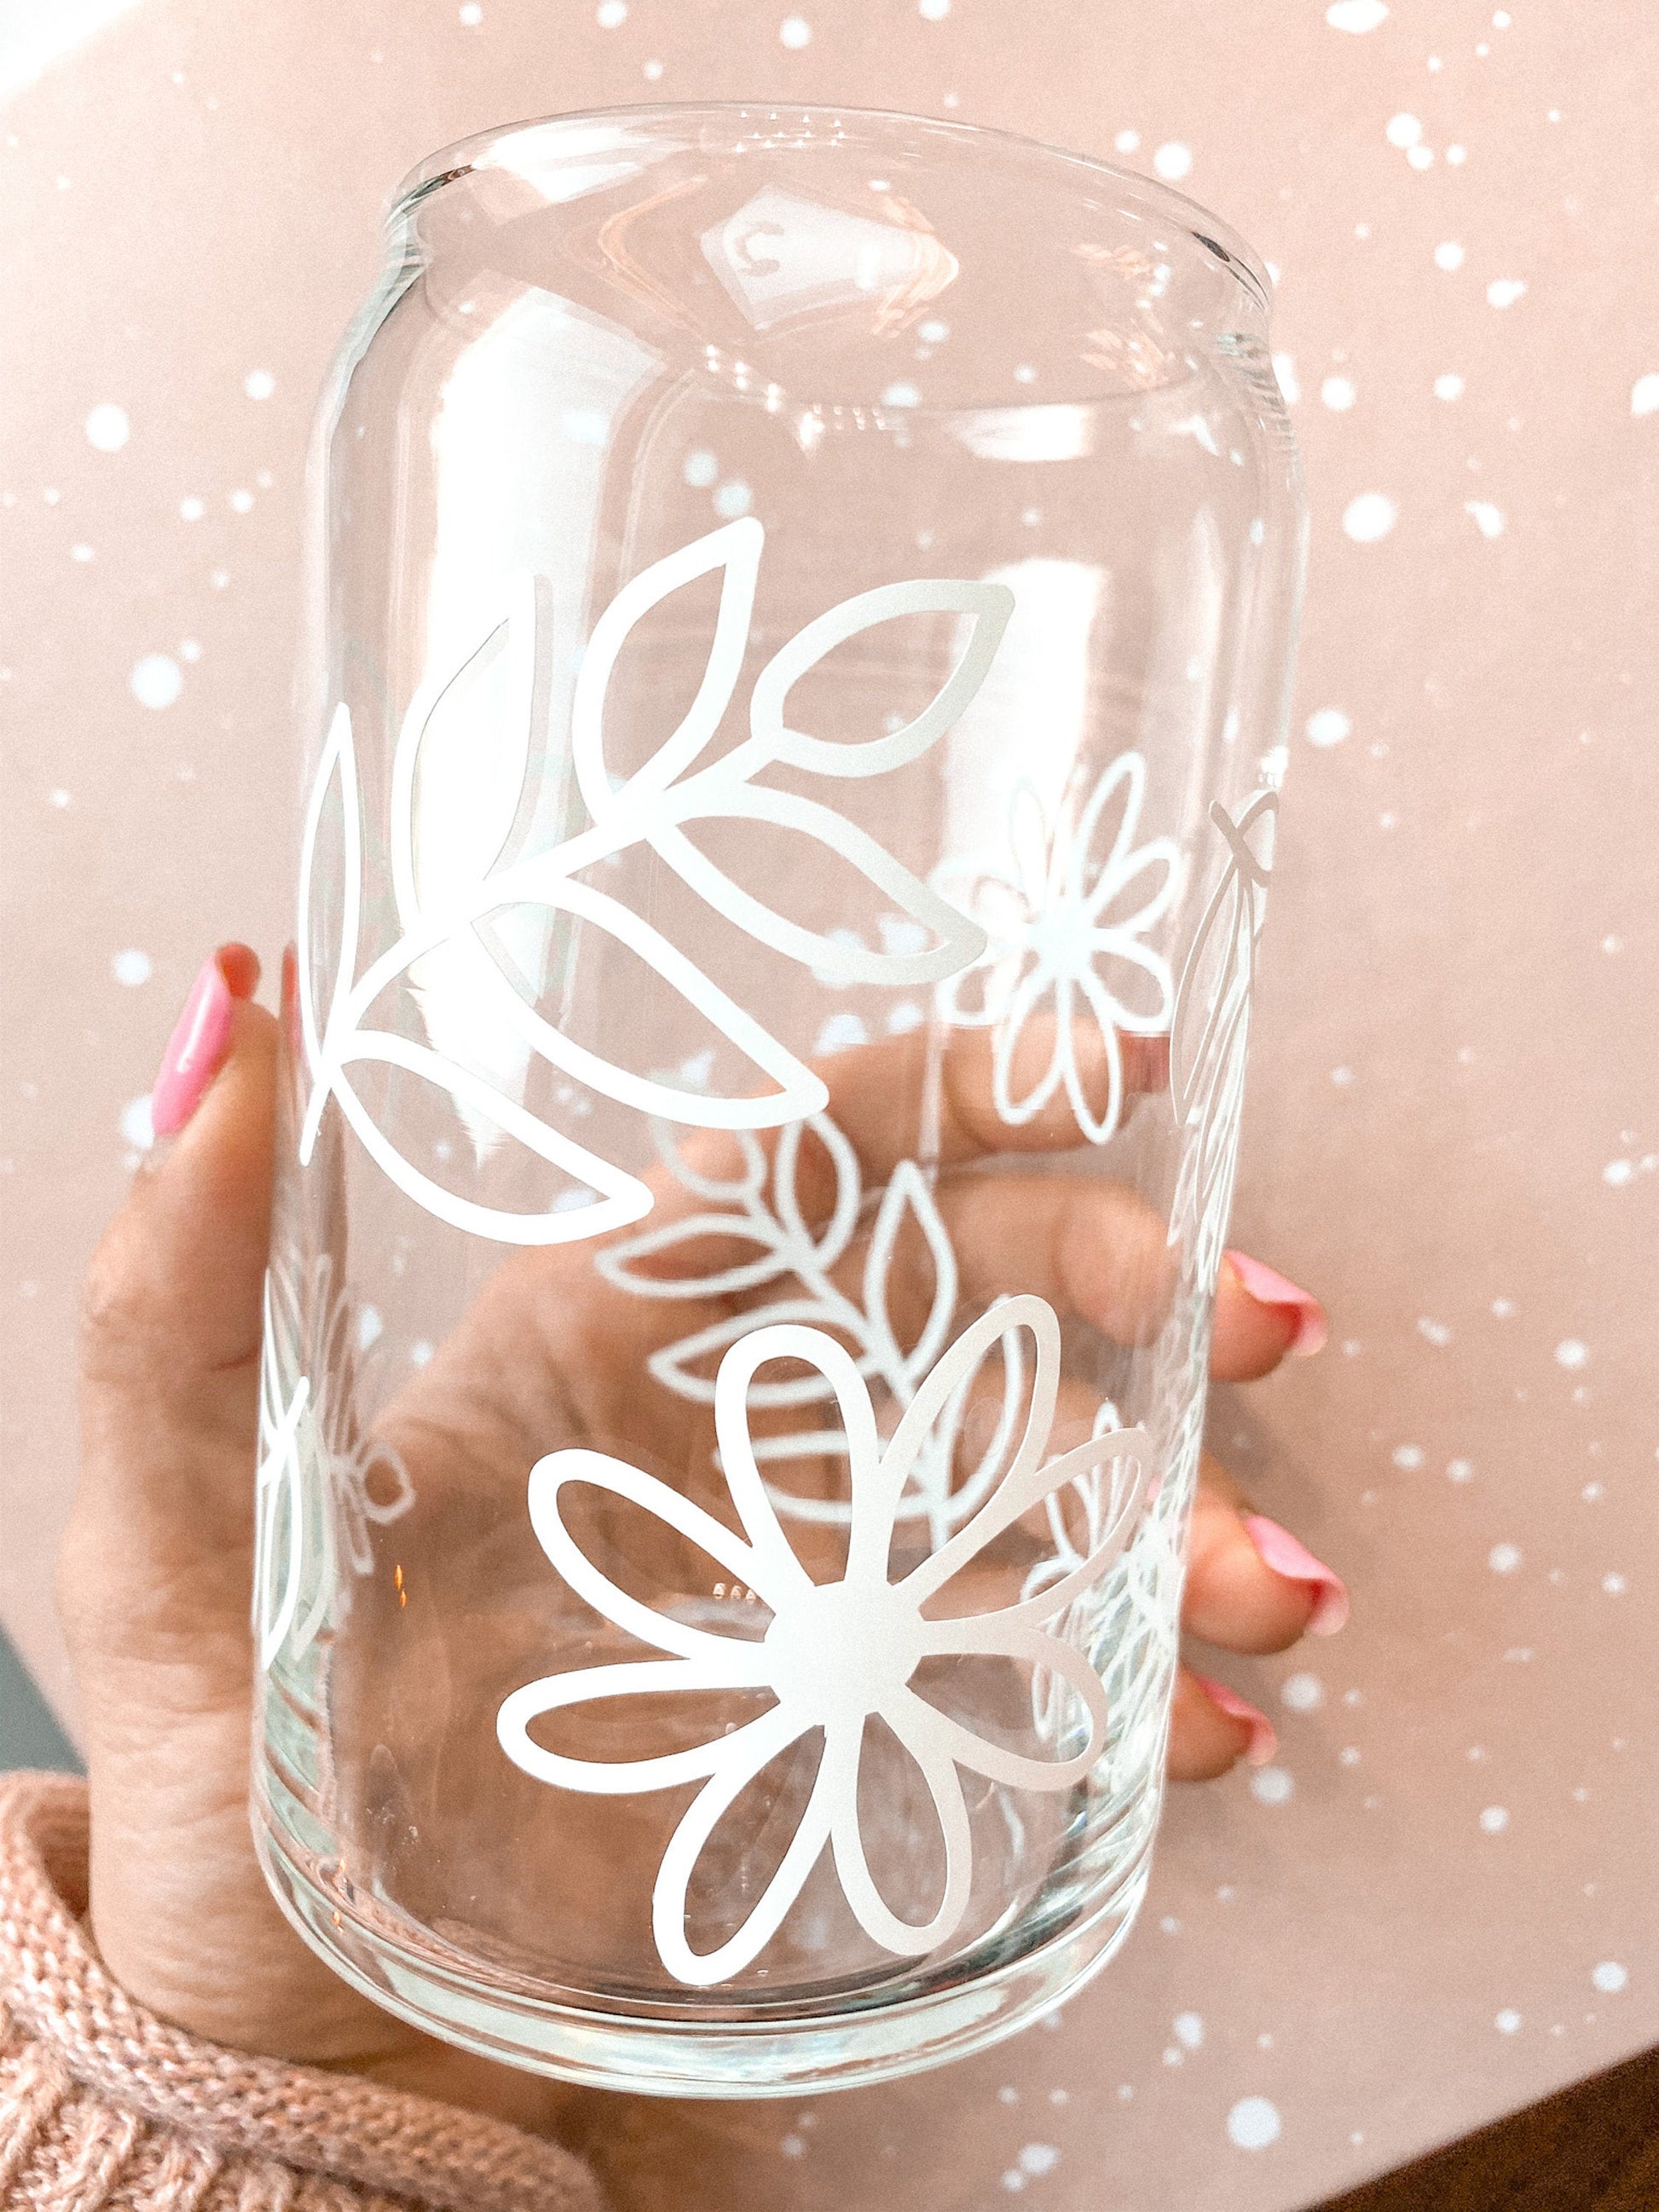 Bloom 16oz Glass Cup